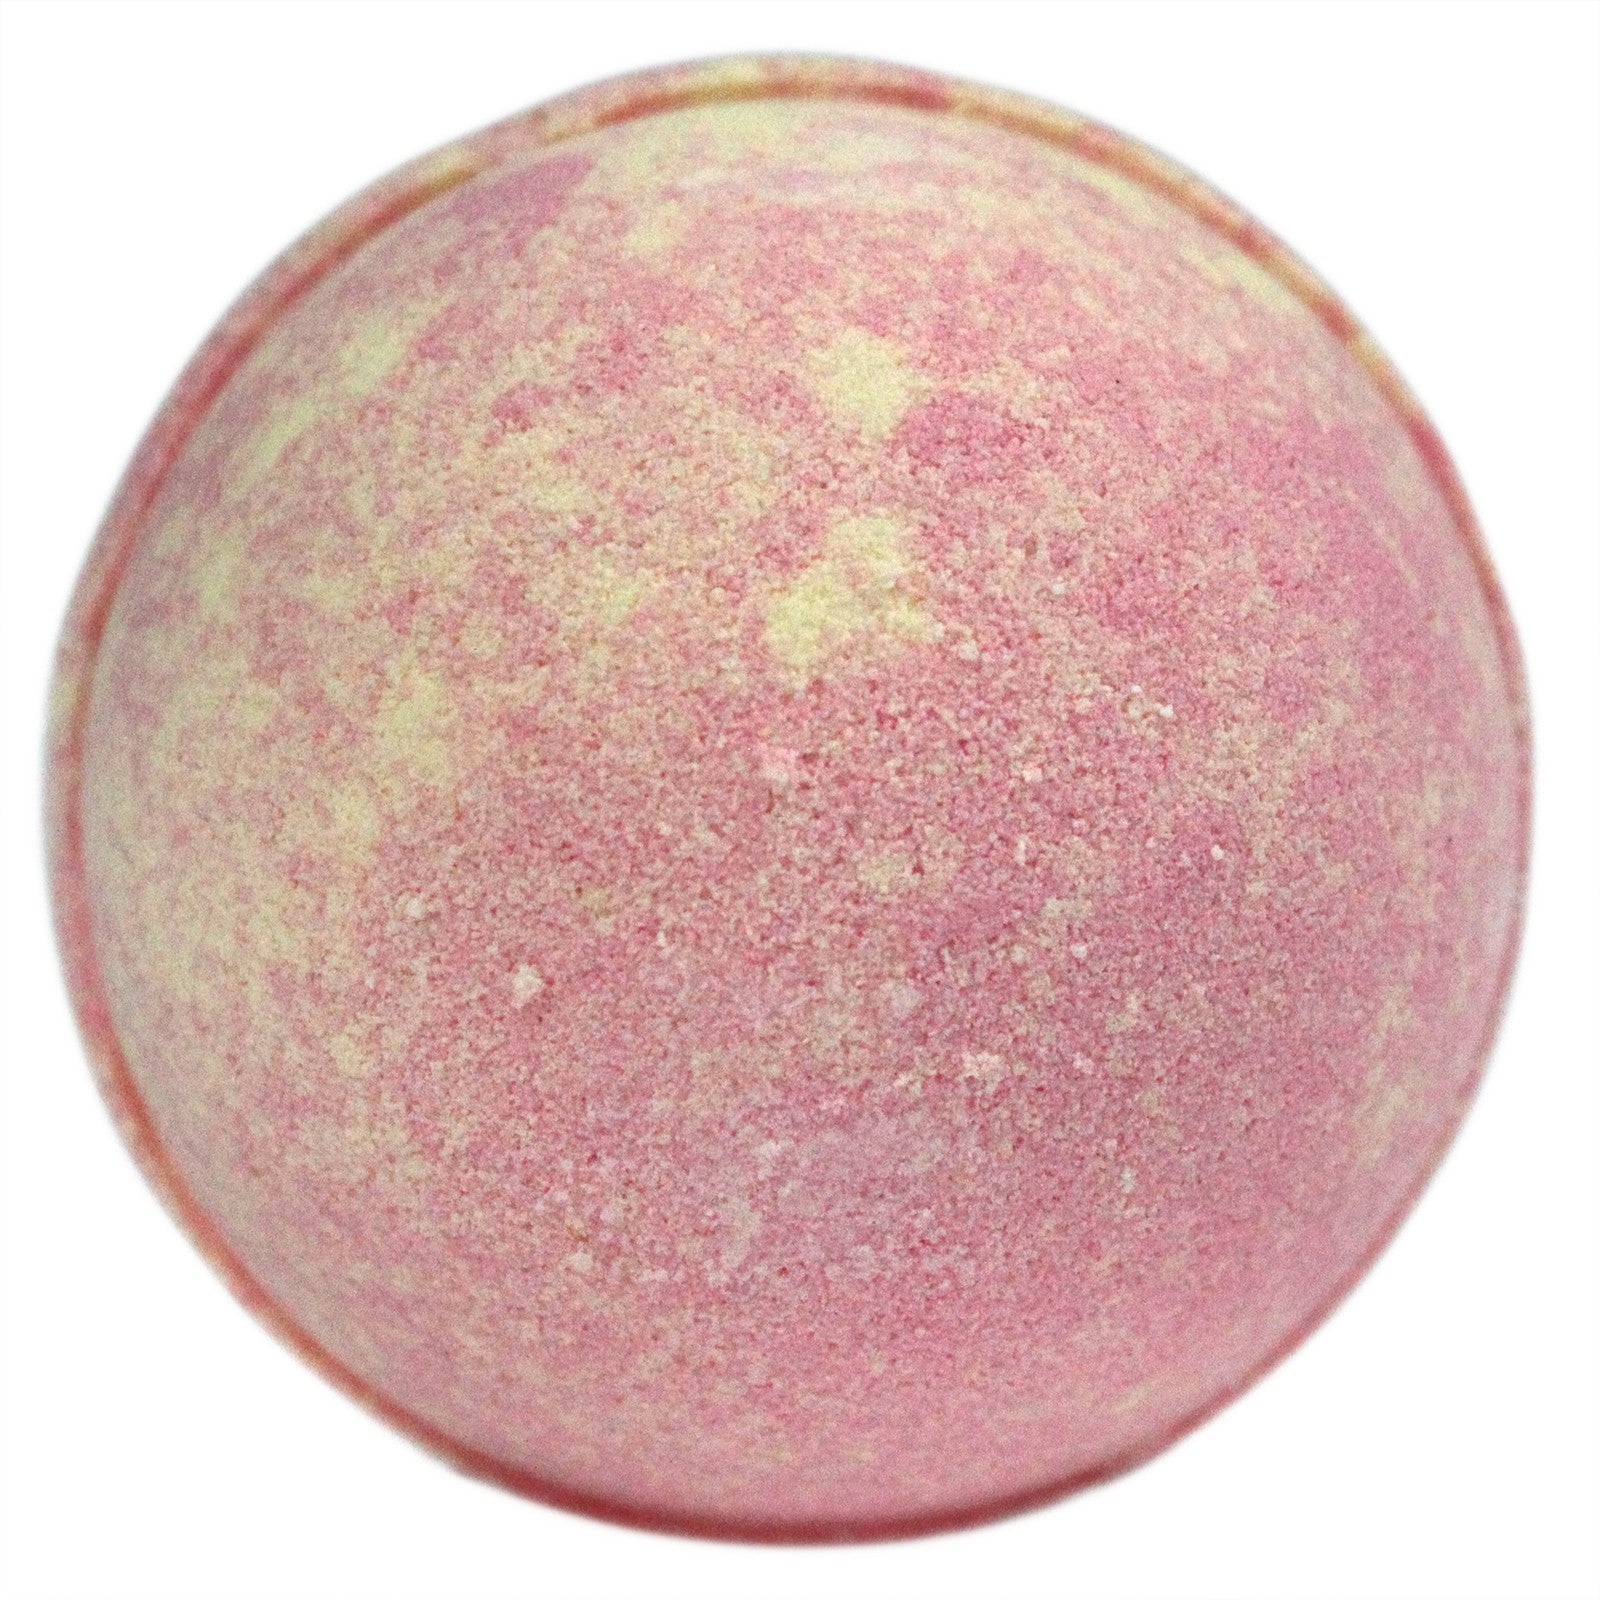 View Five for Her Bath Bomb information